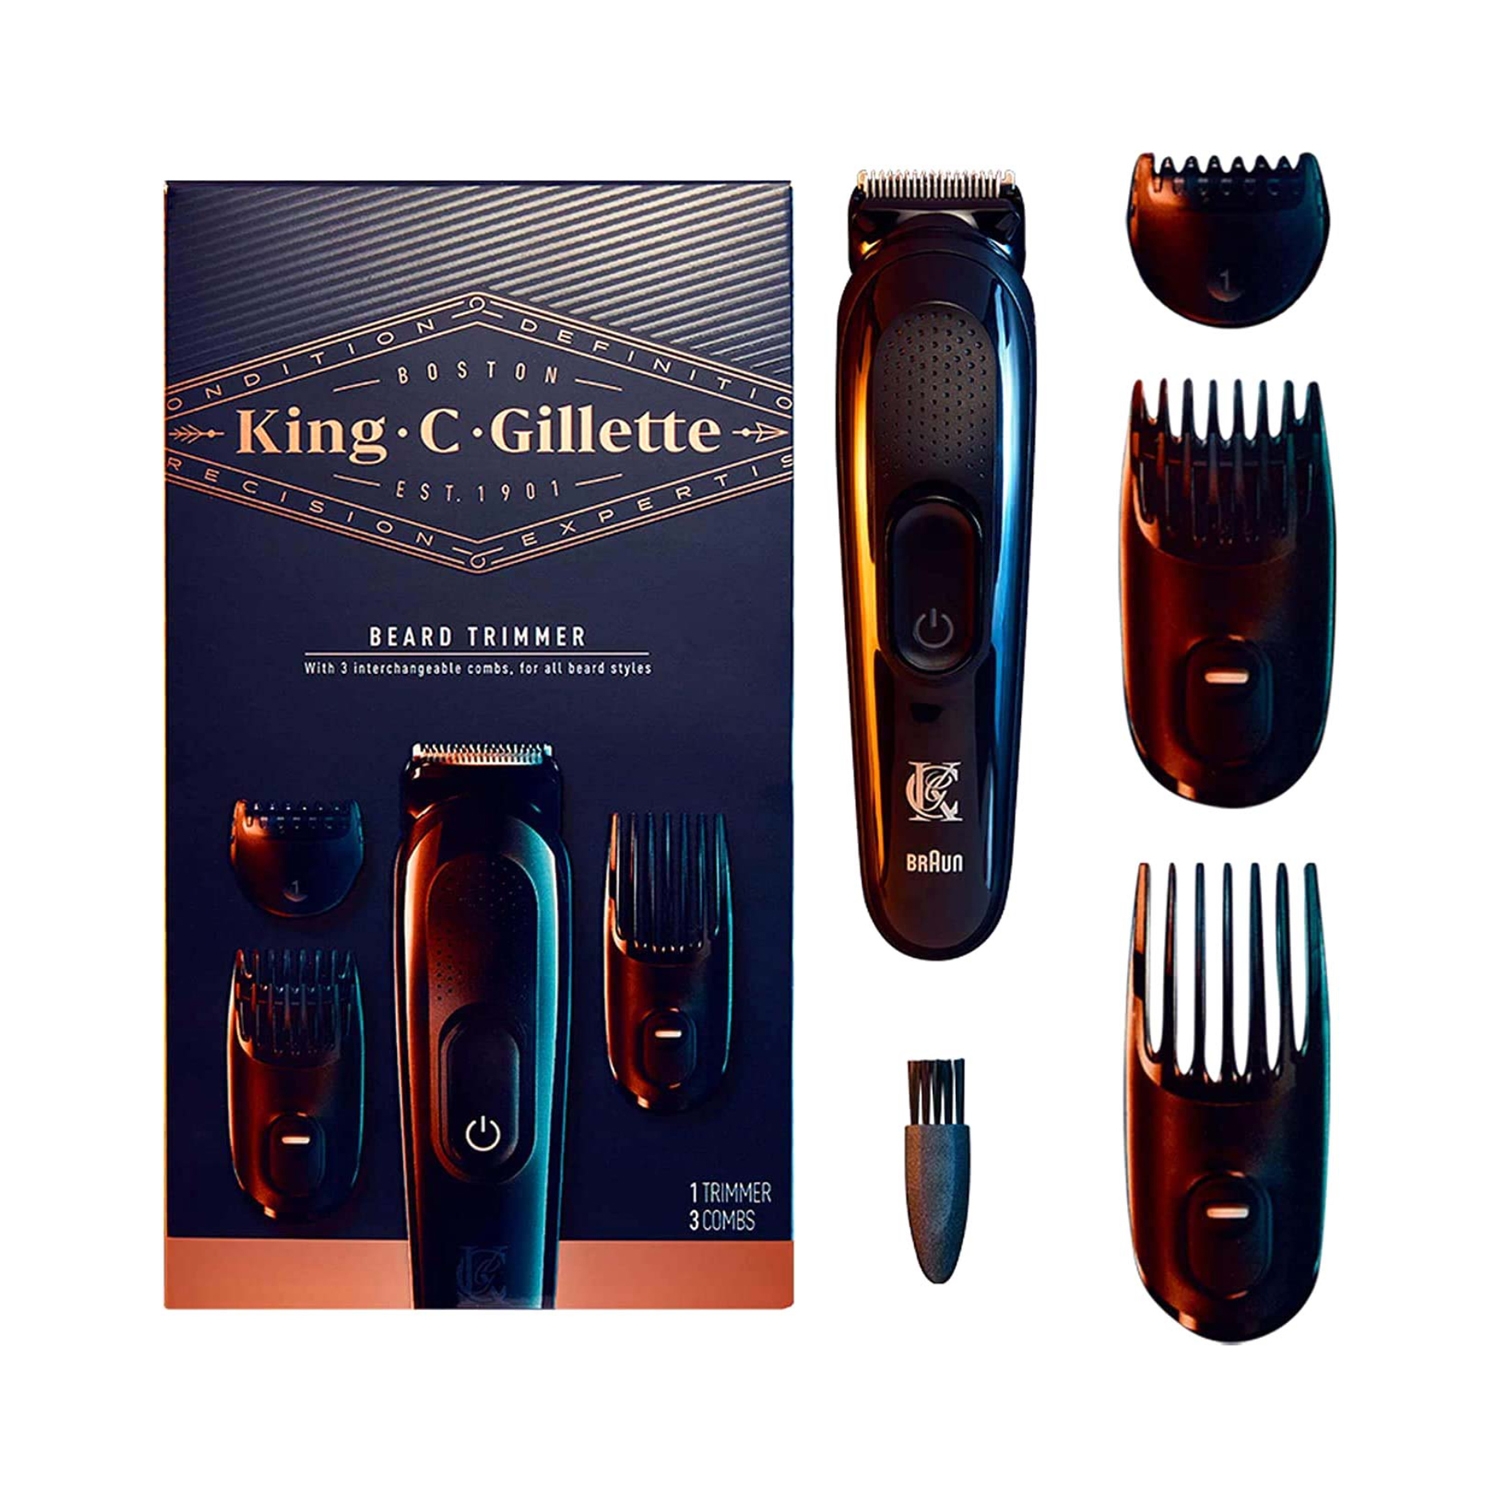 Gillette | Gillette Cordless Men's Beard Trimmer Kit with Lifetime Sharp Blades and 3 Interchangeable Combs